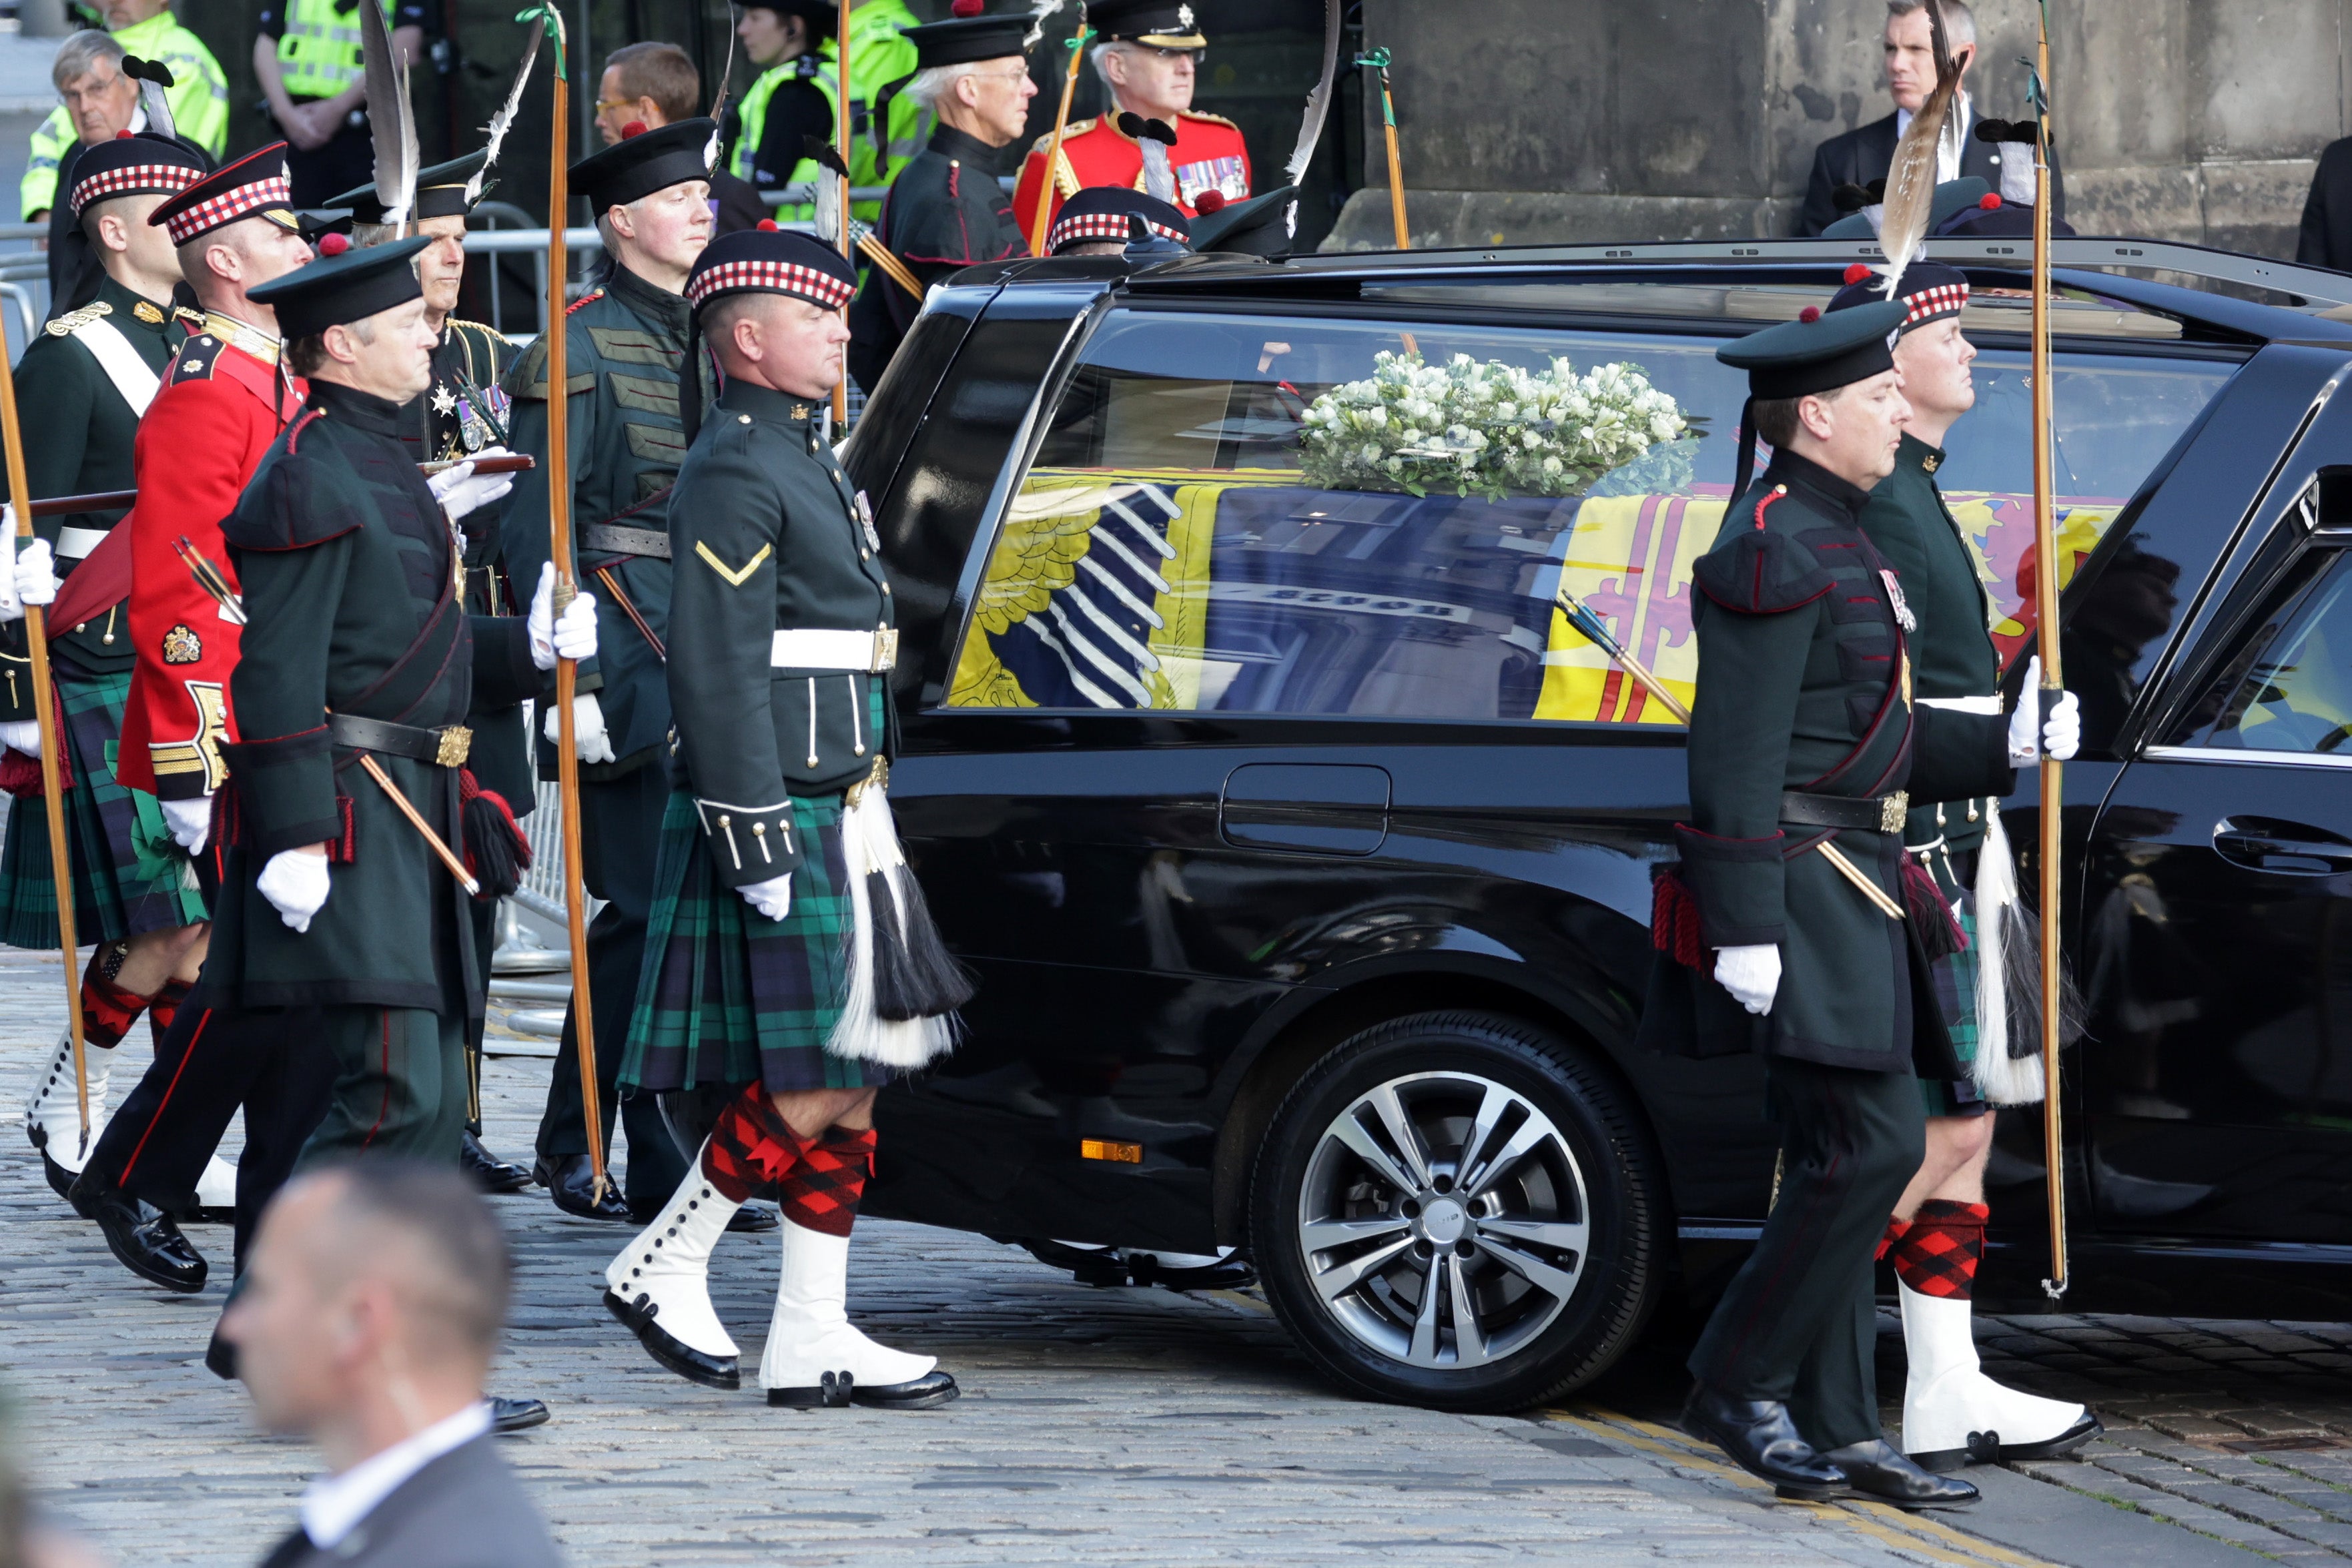 Queen Elizabeth II funeral cortege makes its way along The Royal Mile towards St Giles Cathedral on 12 September 2022 in Edinburgh, Scotland